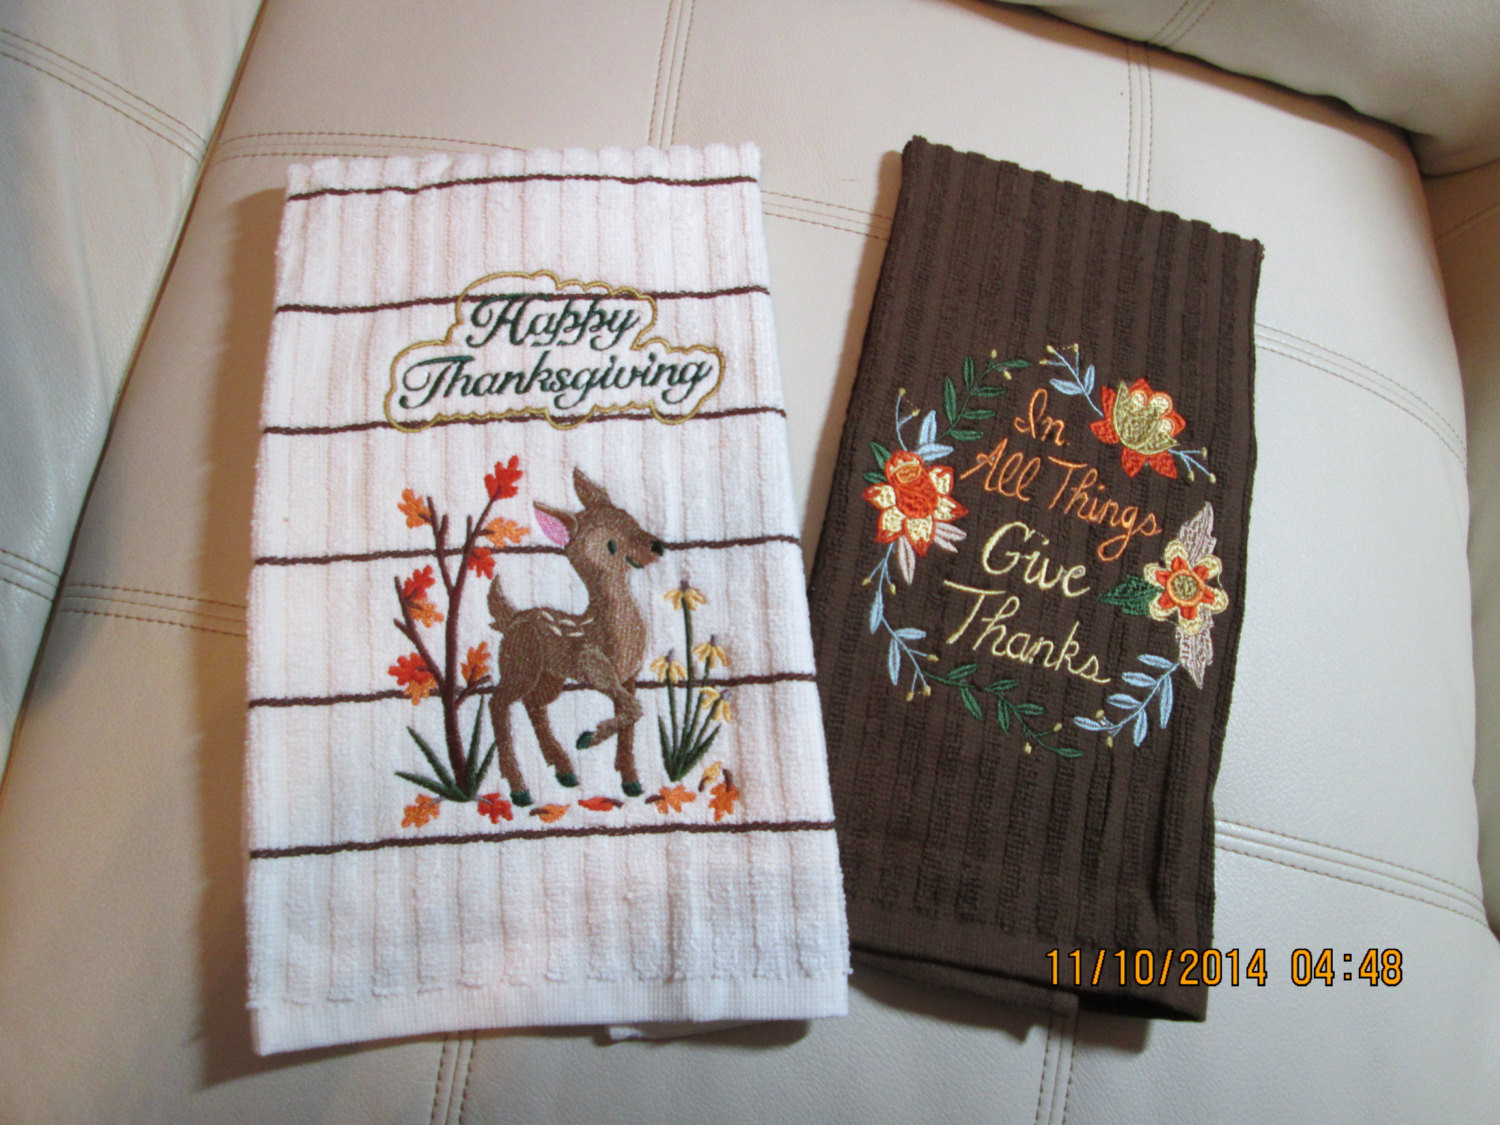 Thanksgiving Kitchen Towels
 Thanksgiving embroidered kitchen towels set